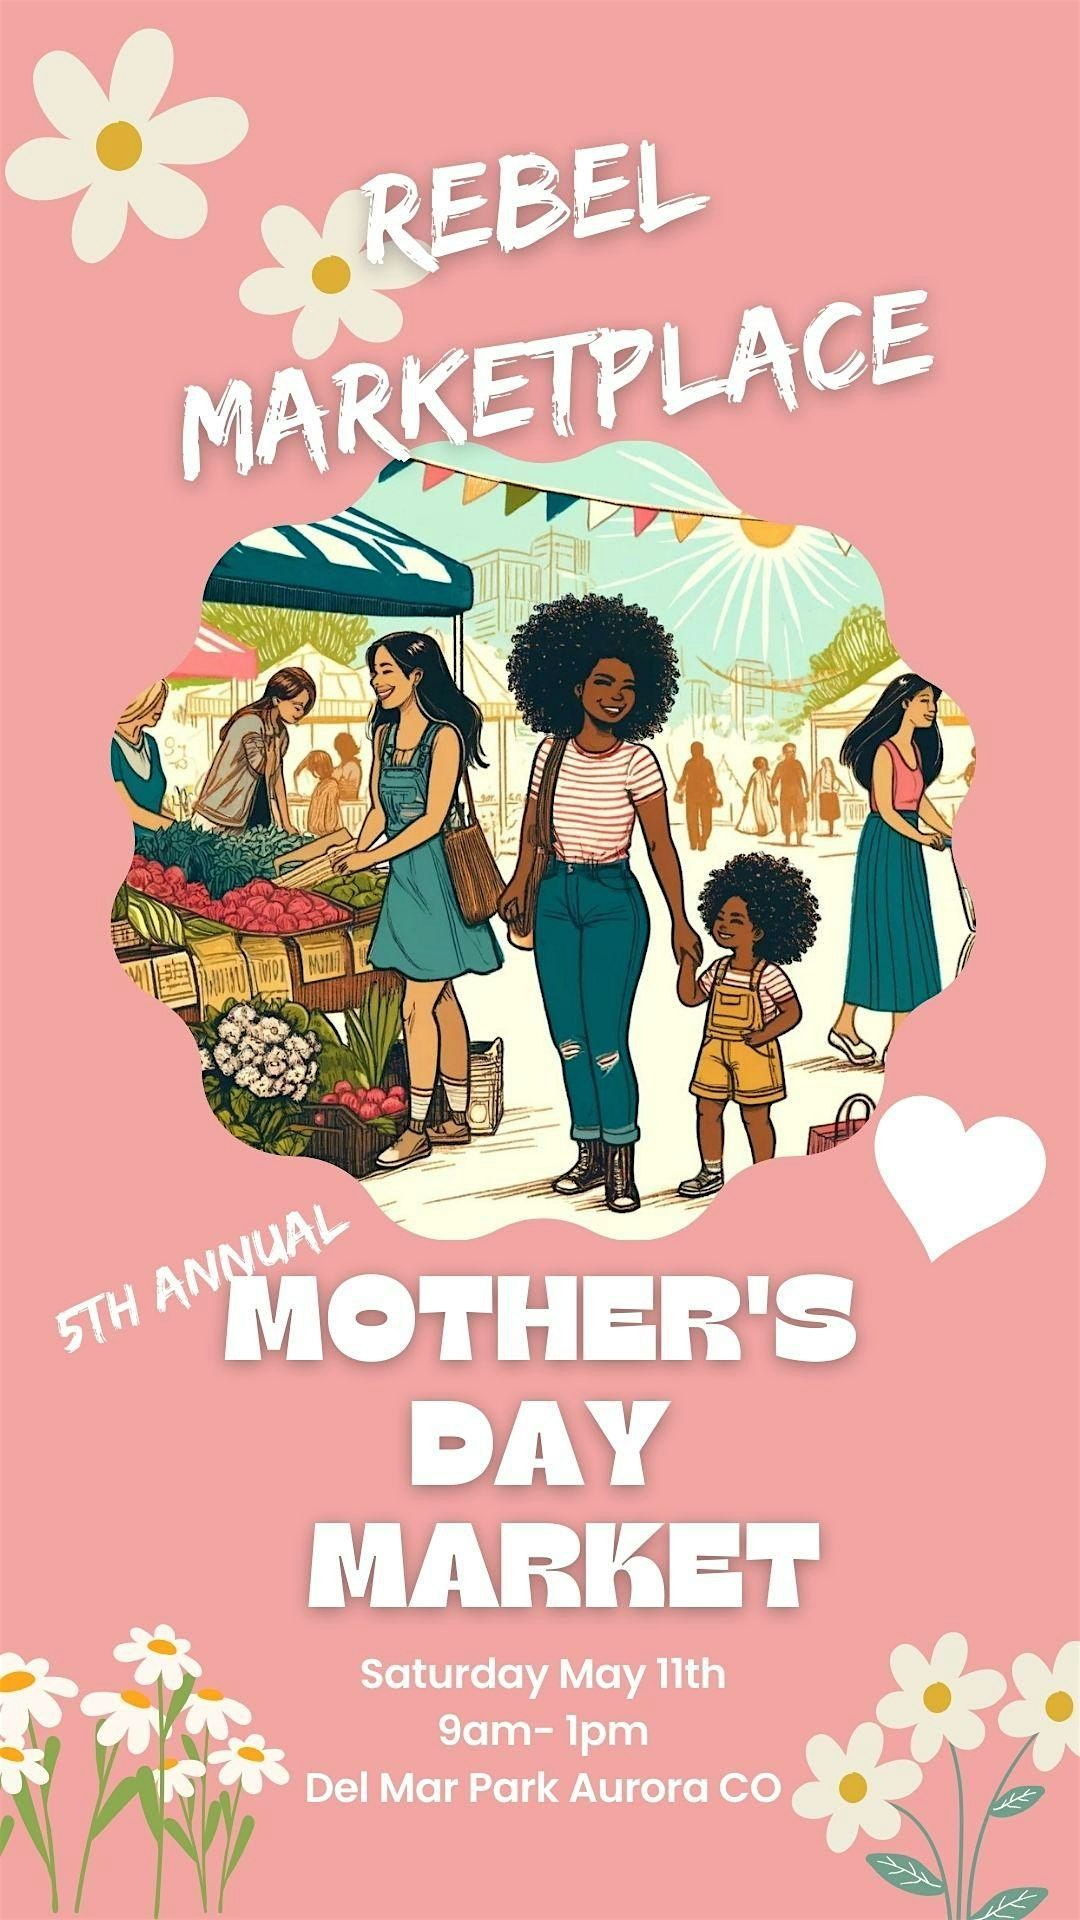 5th Annual Mother's Day Market at Rebel Marketplace!